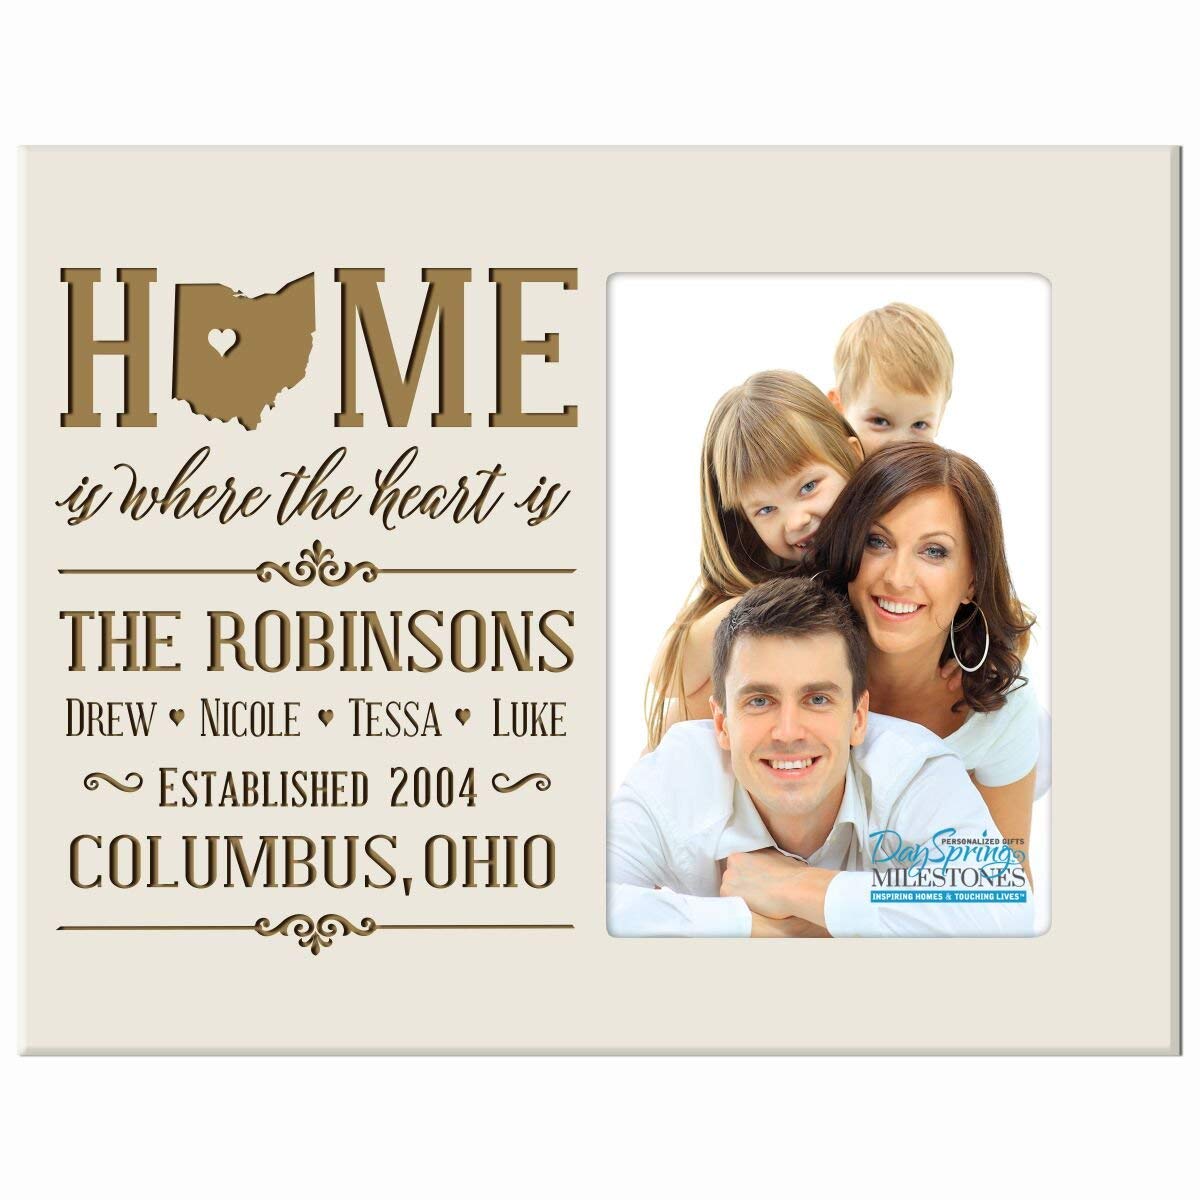 Personalized State Picture Frame with Names and Est. Year - Ohio - LifeSong Milestones